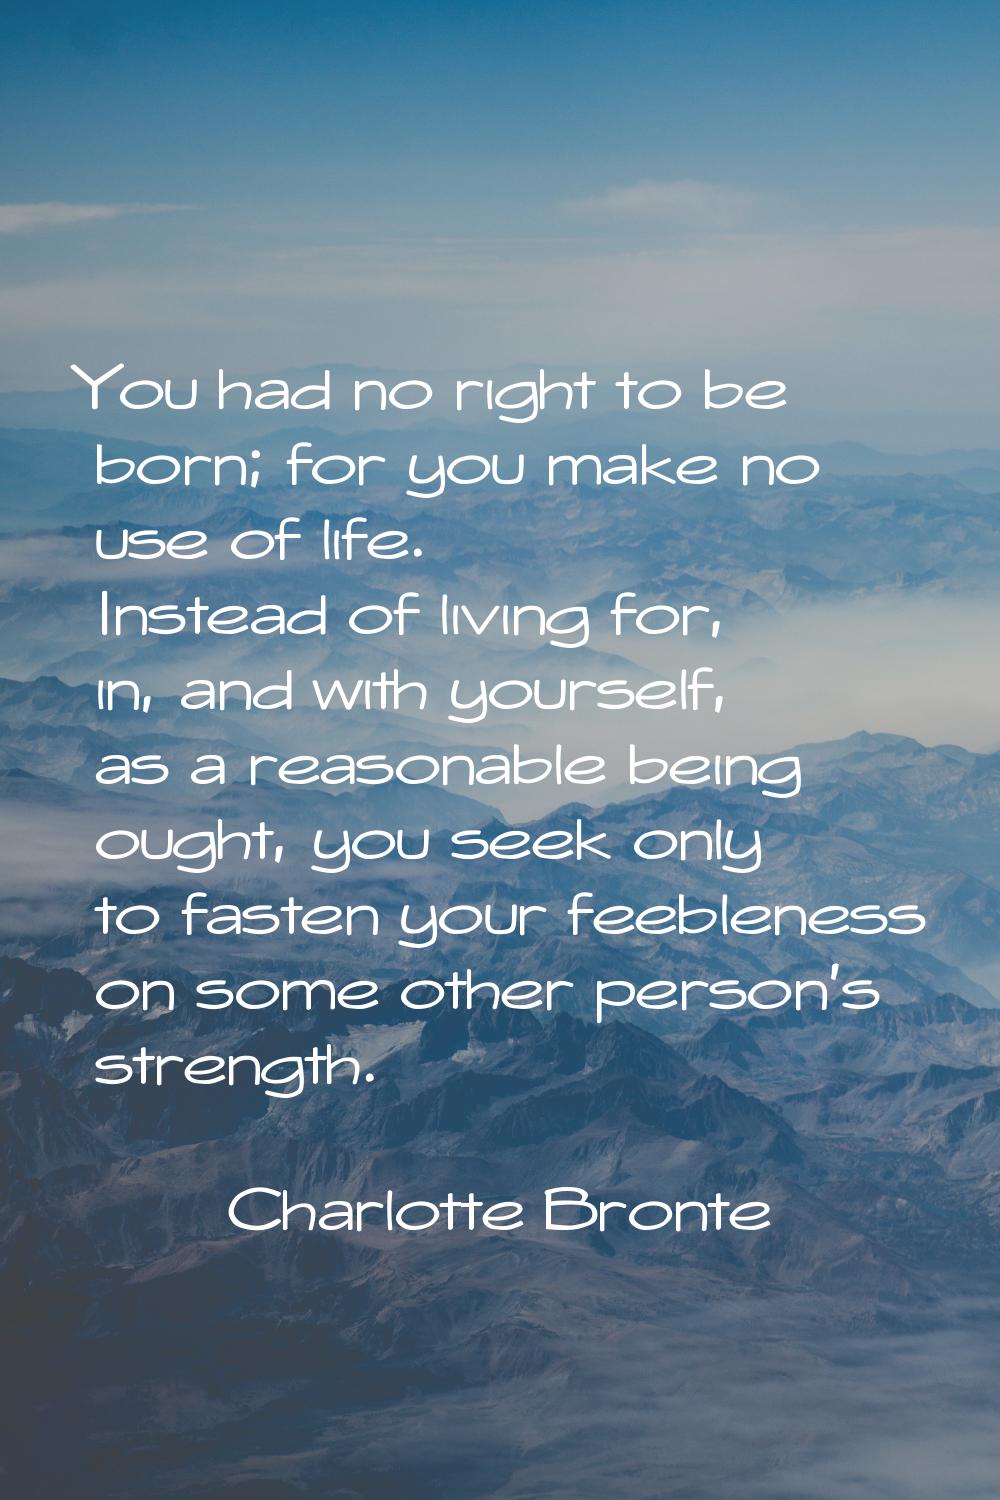 You had no right to be born; for you make no use of life. Instead of living for, in, and with yours